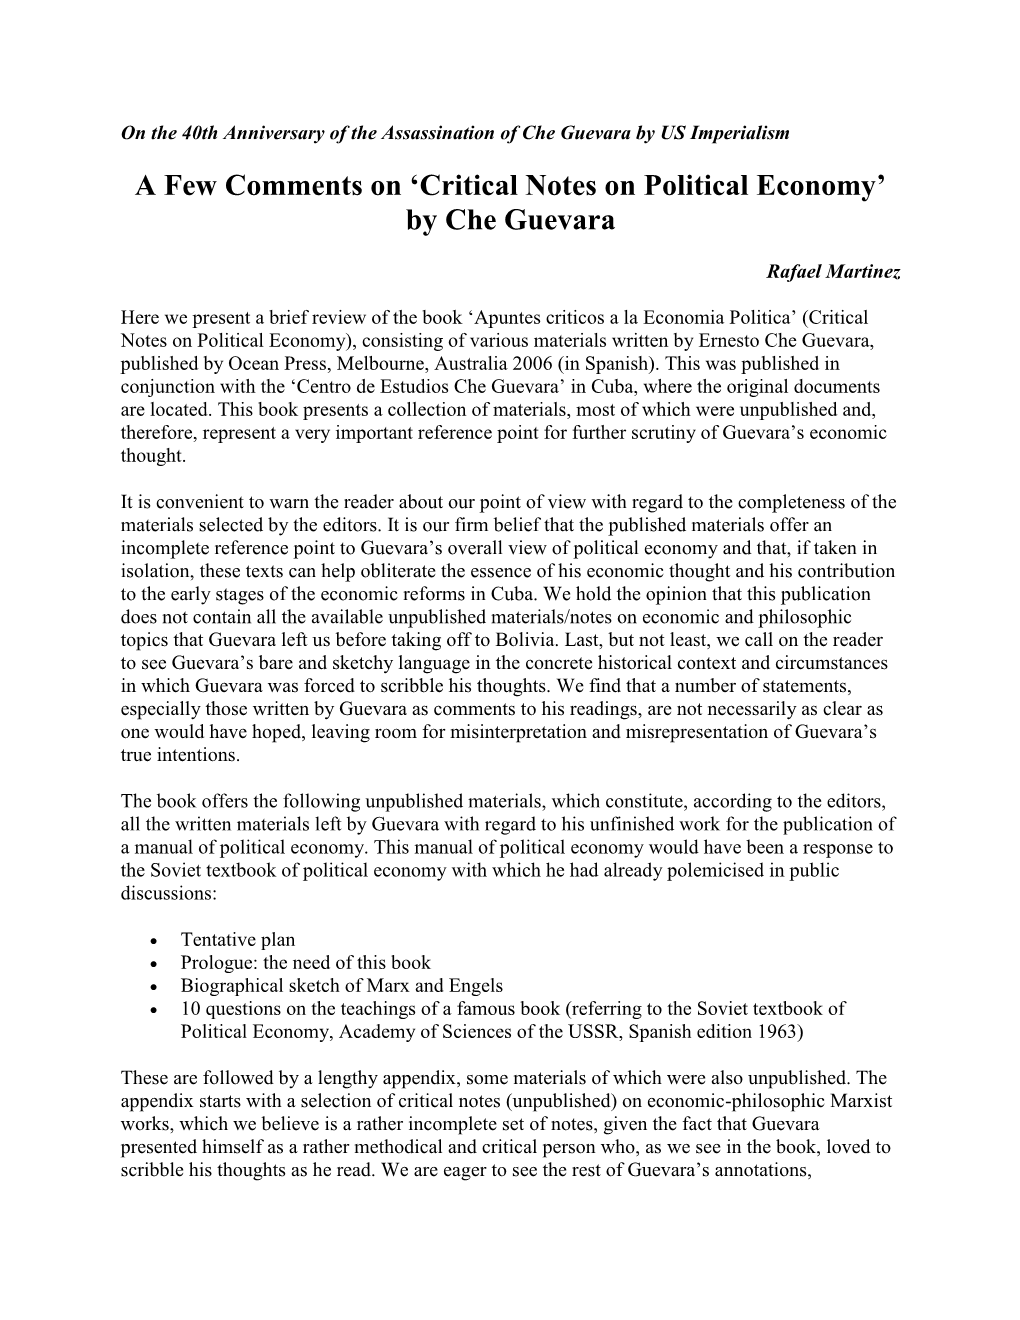 'Critical Notes on Political Economy' by Che Guevara